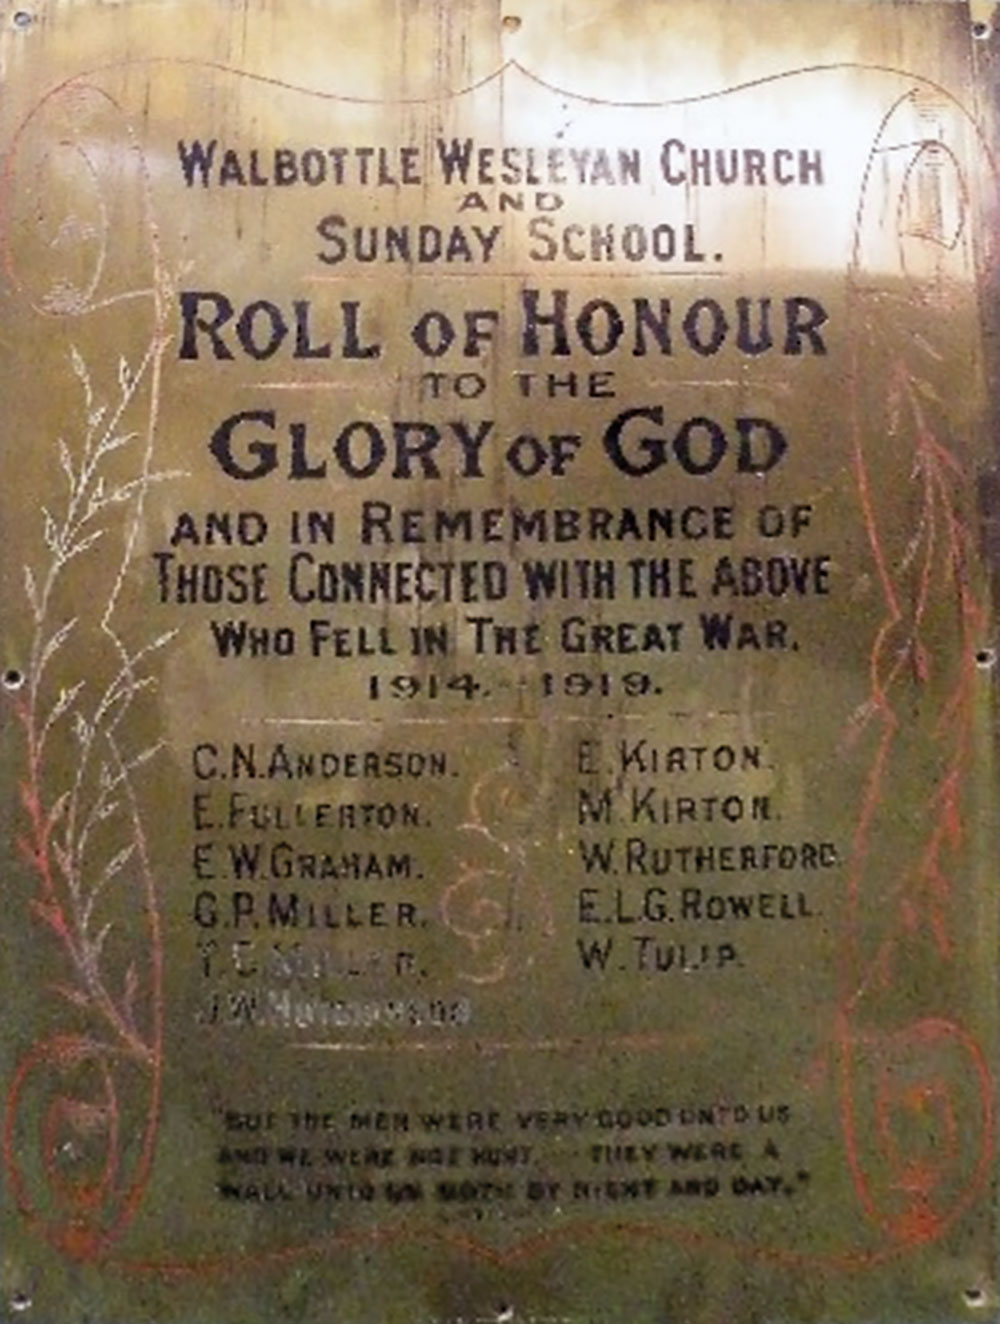 Image of the plaque recording Edwards name that was mounted at Walbottle Methodist church.